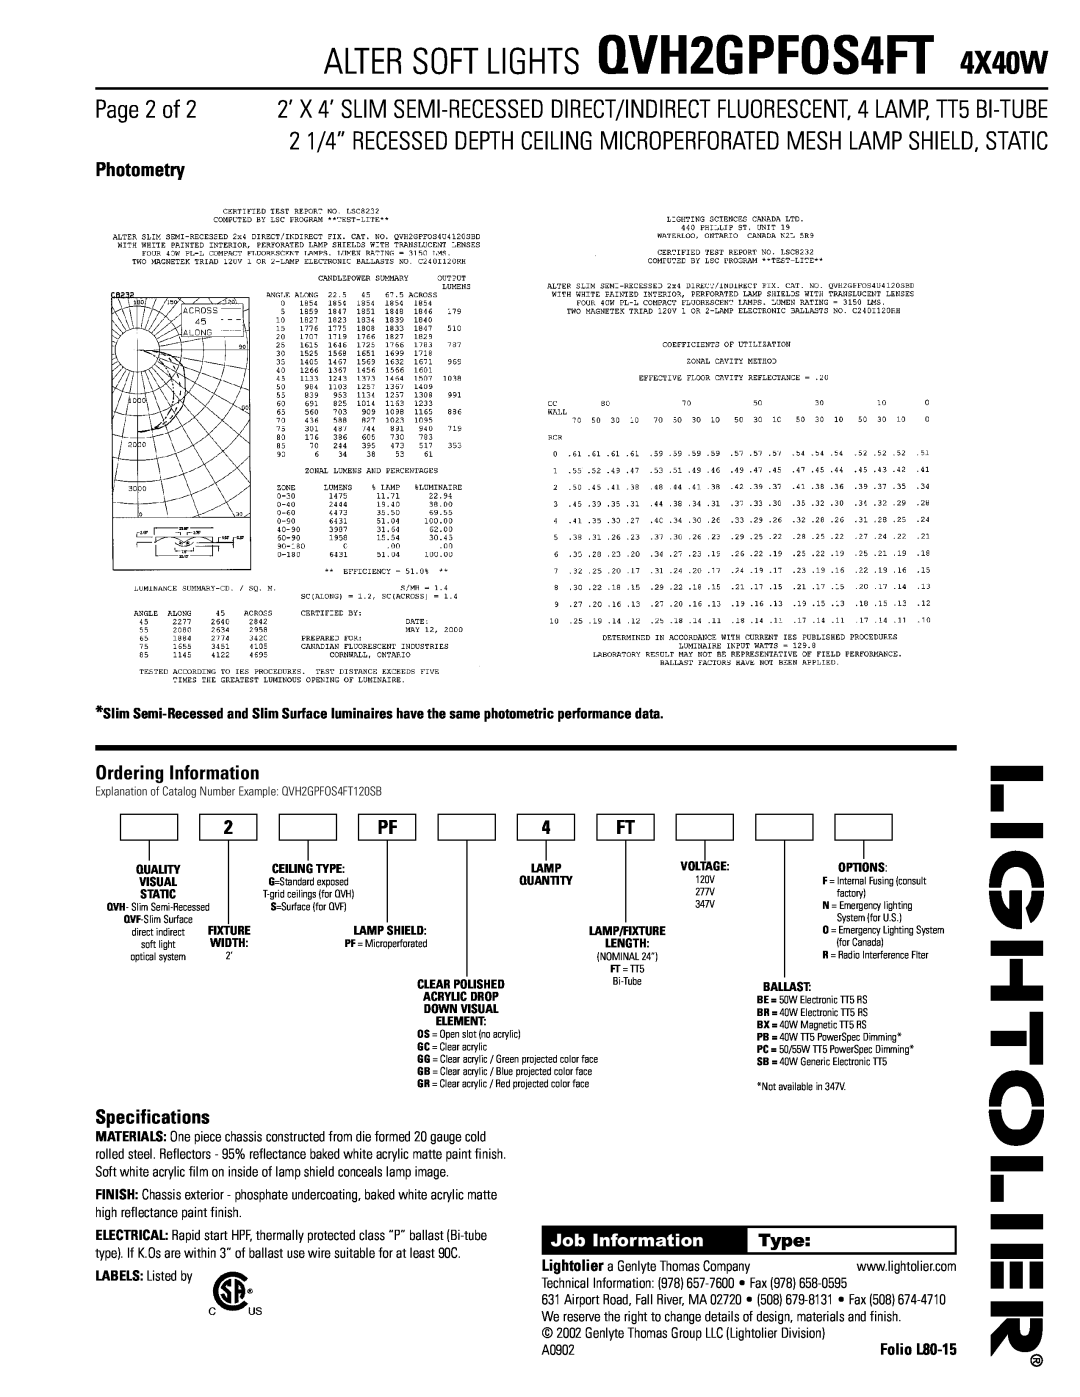 Lightolier dimensions Photometry, Ordering Information, Specifications, ALTER SOFT LIGHTS QVH2GPFOS4FT 4X40W, Page 2 of 